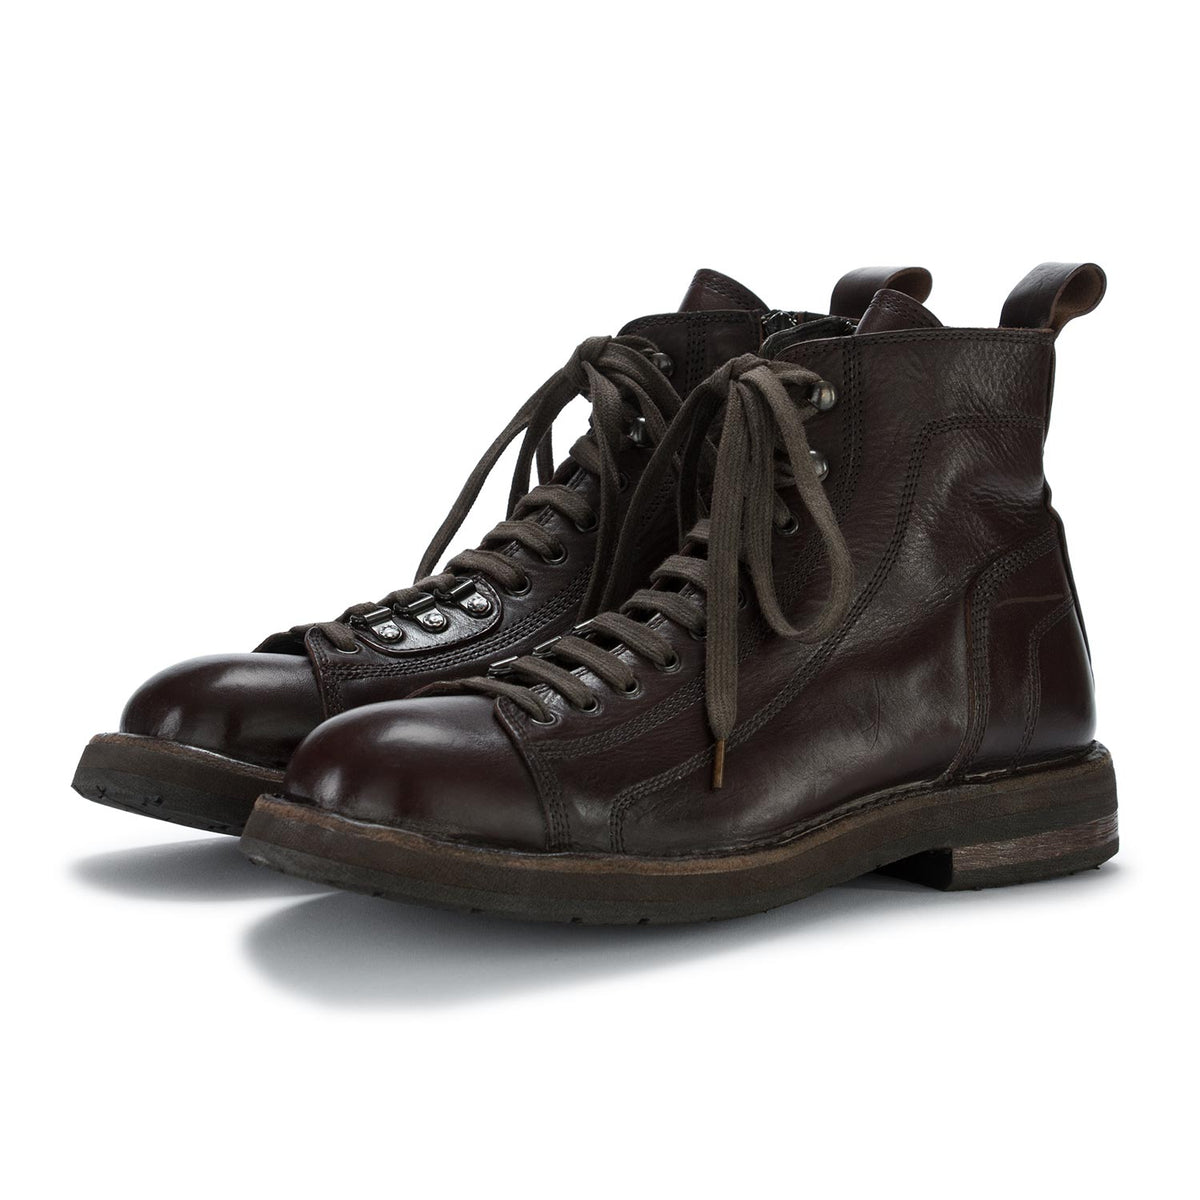 Clam Zich voorstellen Verwoesting MOMA | Ankle boots 2cw209-to toscano brown | MODEMOUR ♥